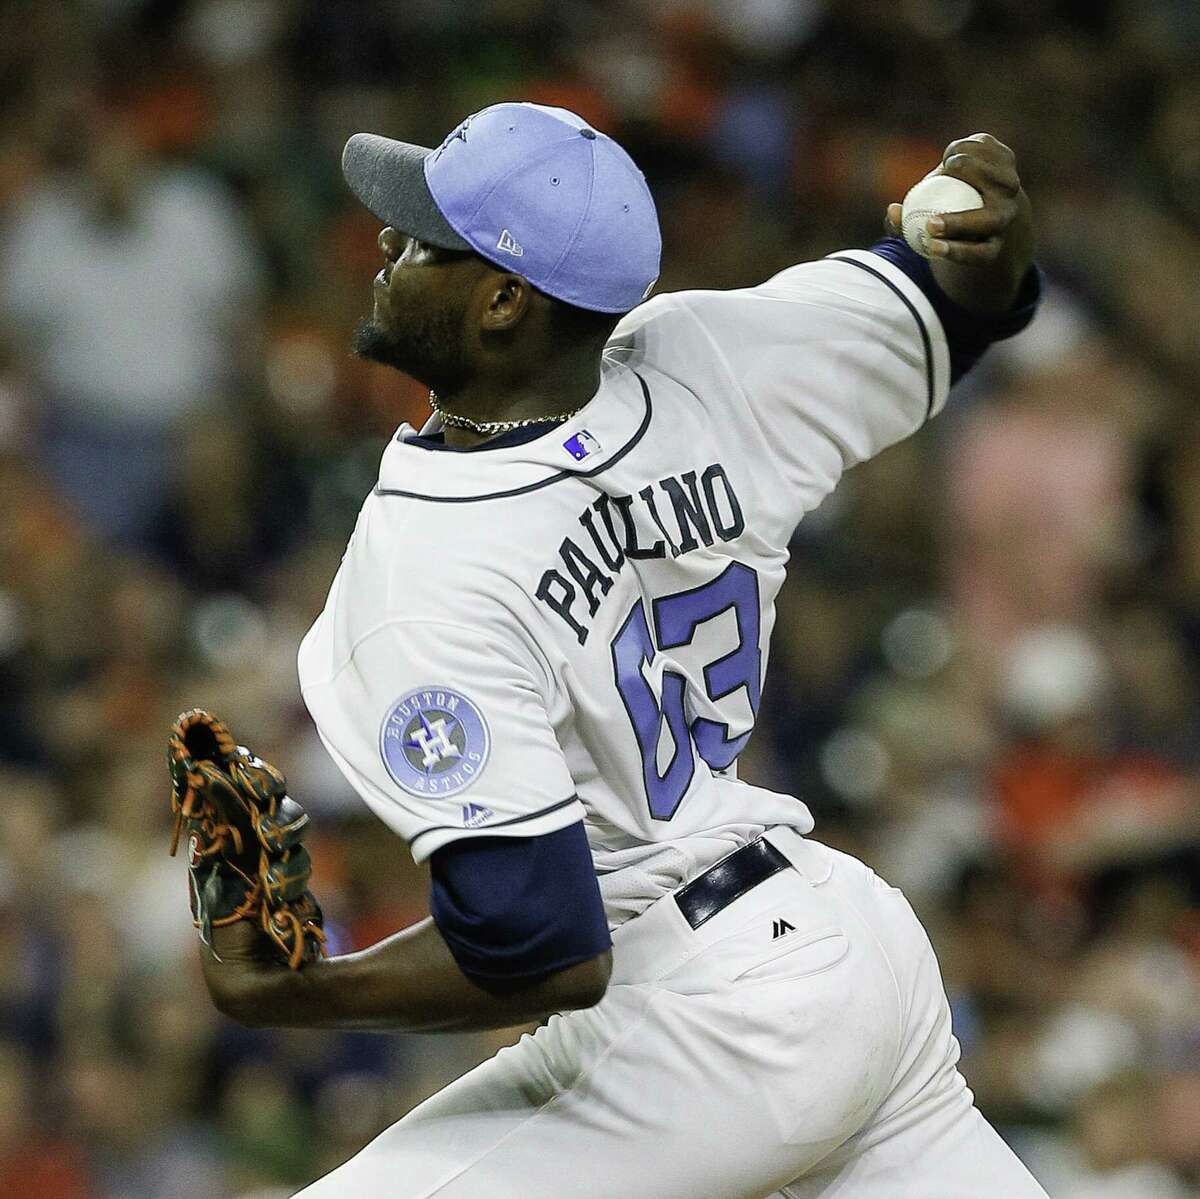 David Paulino pitched six efficient innings for the Astros on Saturday night to earn his first major league victory.